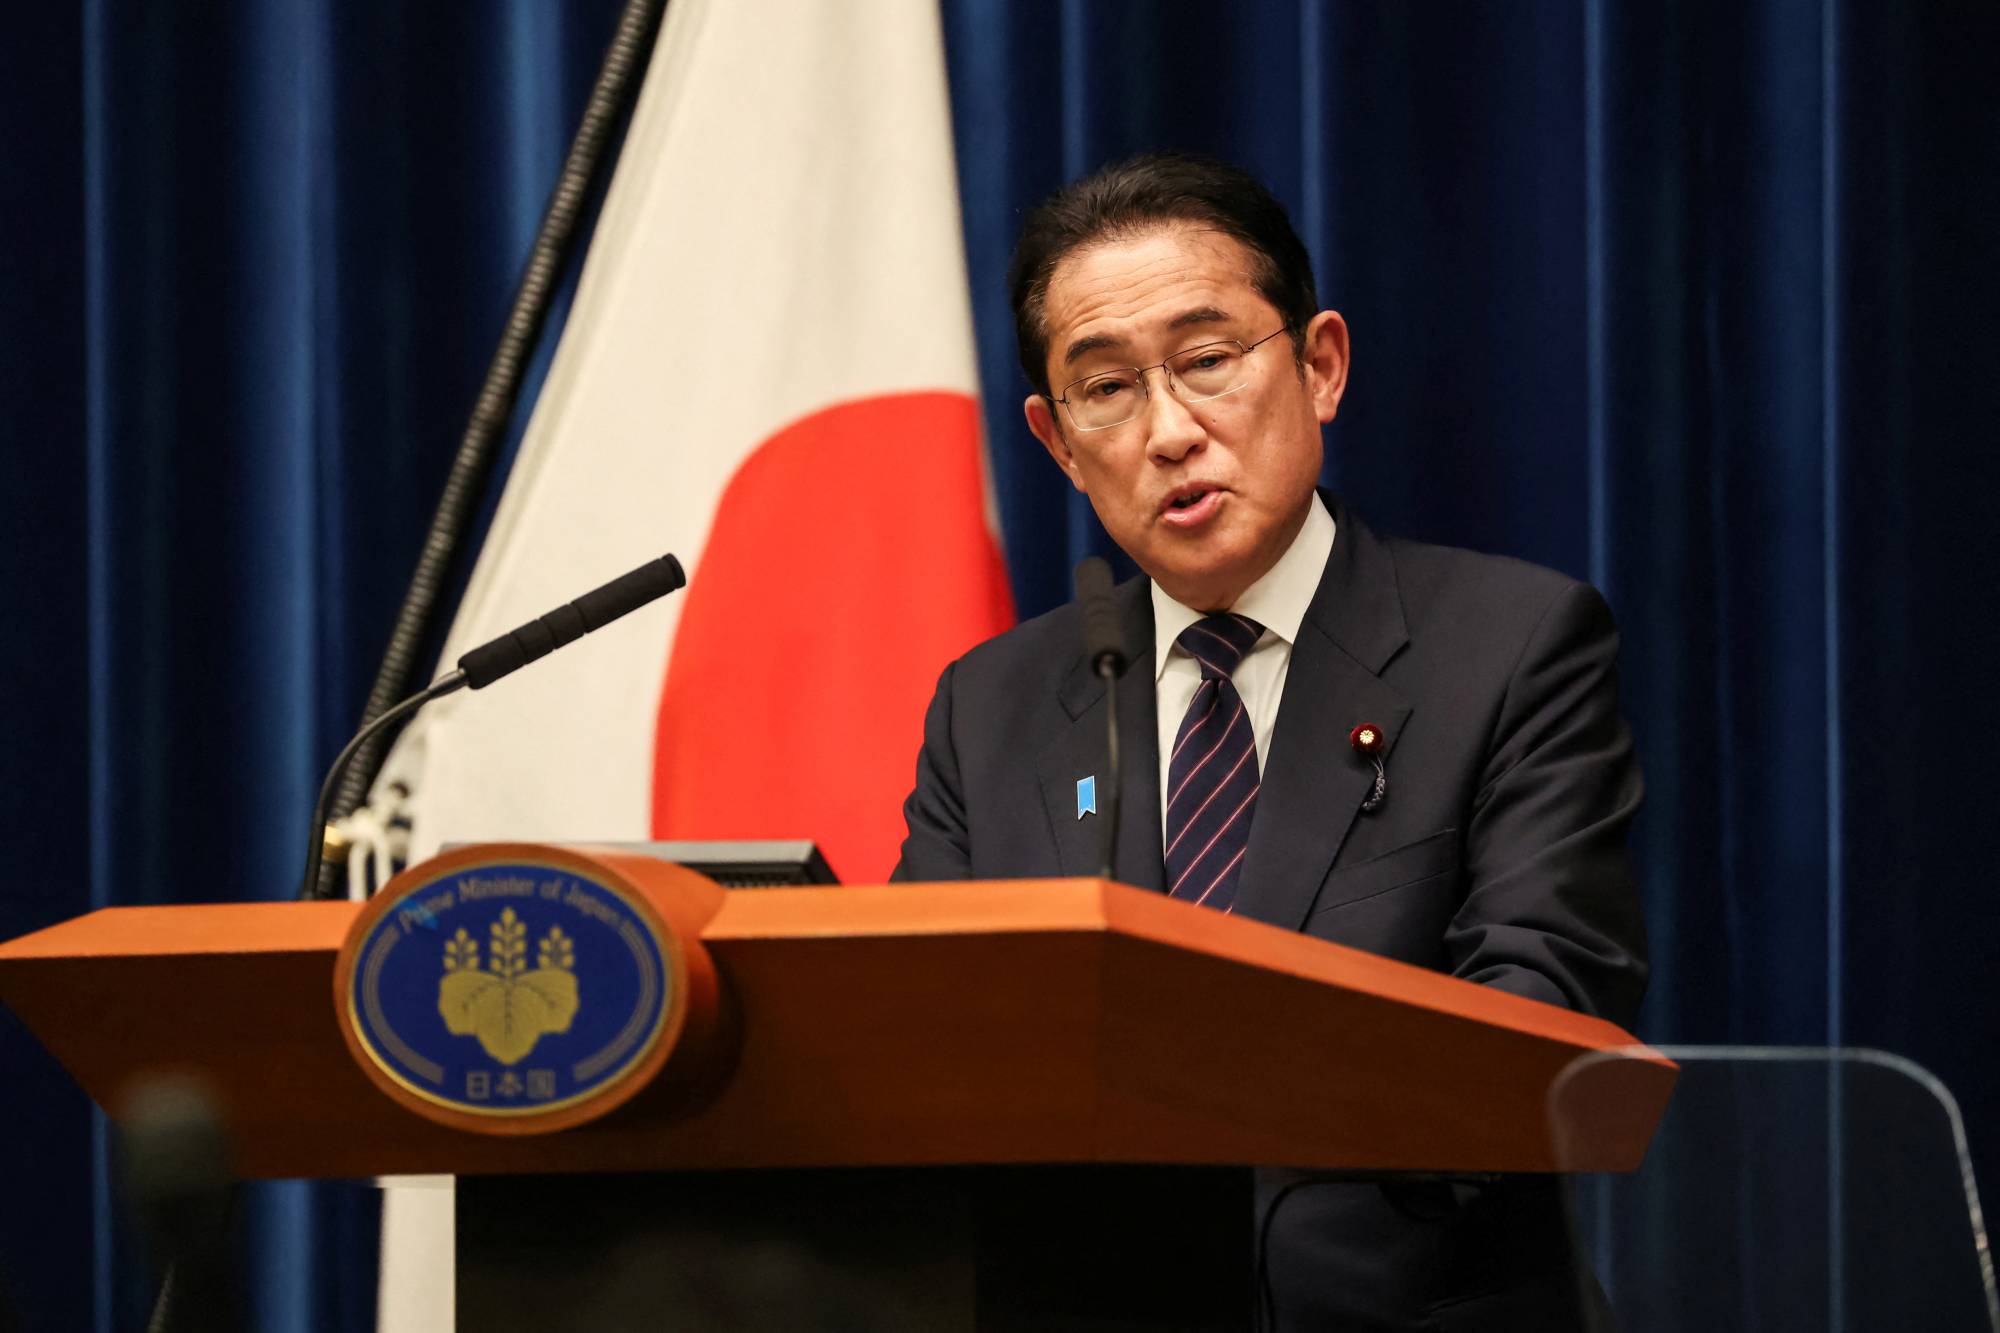 Prime Minister Fumio Kishida speaks during a news conference in Tokyo on Wednesday. | POOL / VIA REUTERS